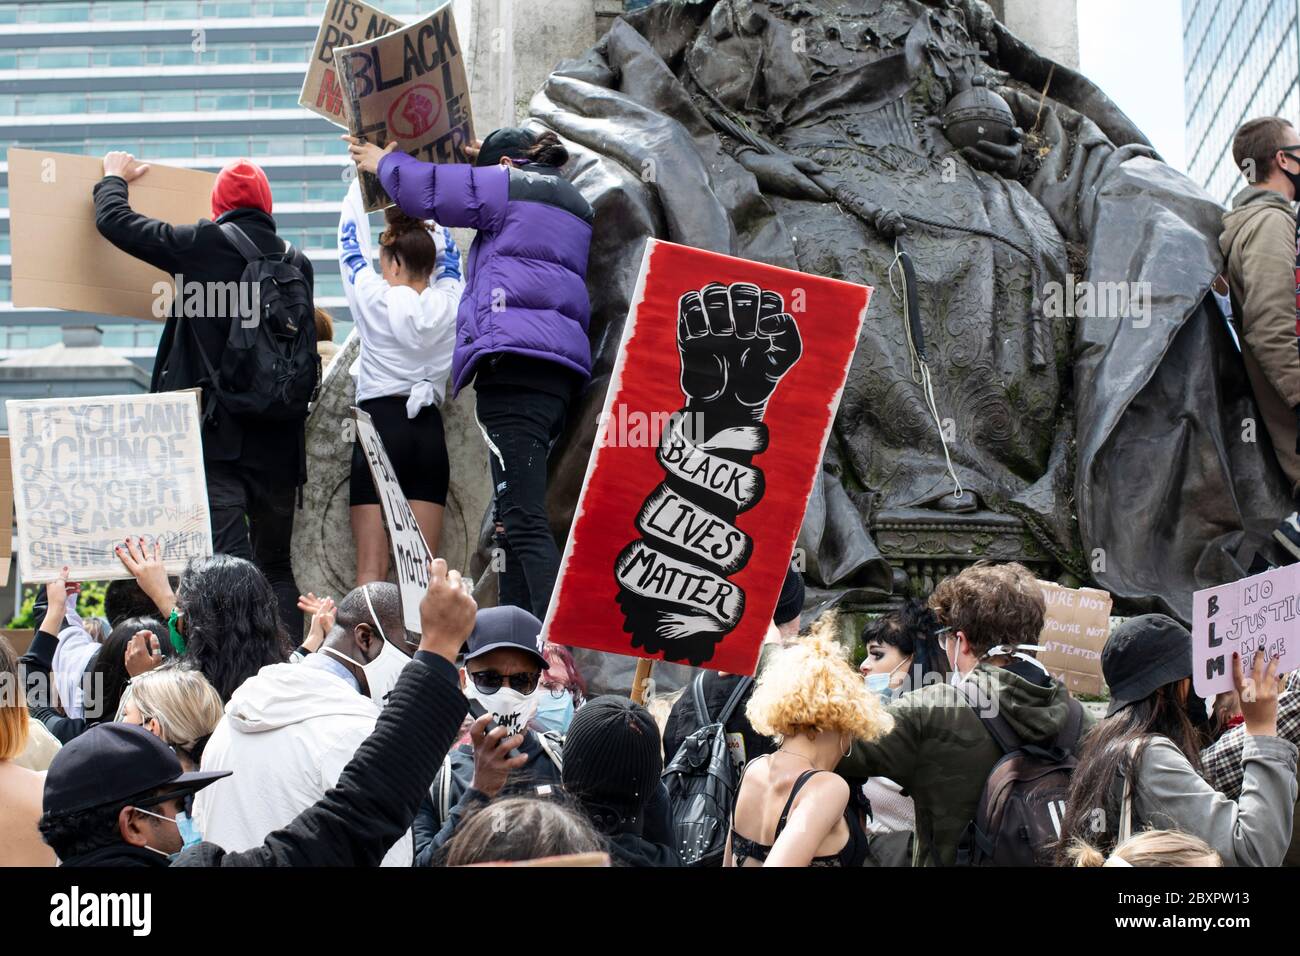 Black Lives Matter Protest, Manchester UK. Protesters on the plinth of Queen Victoria statue with red placard and black fist symbol Stock Photo